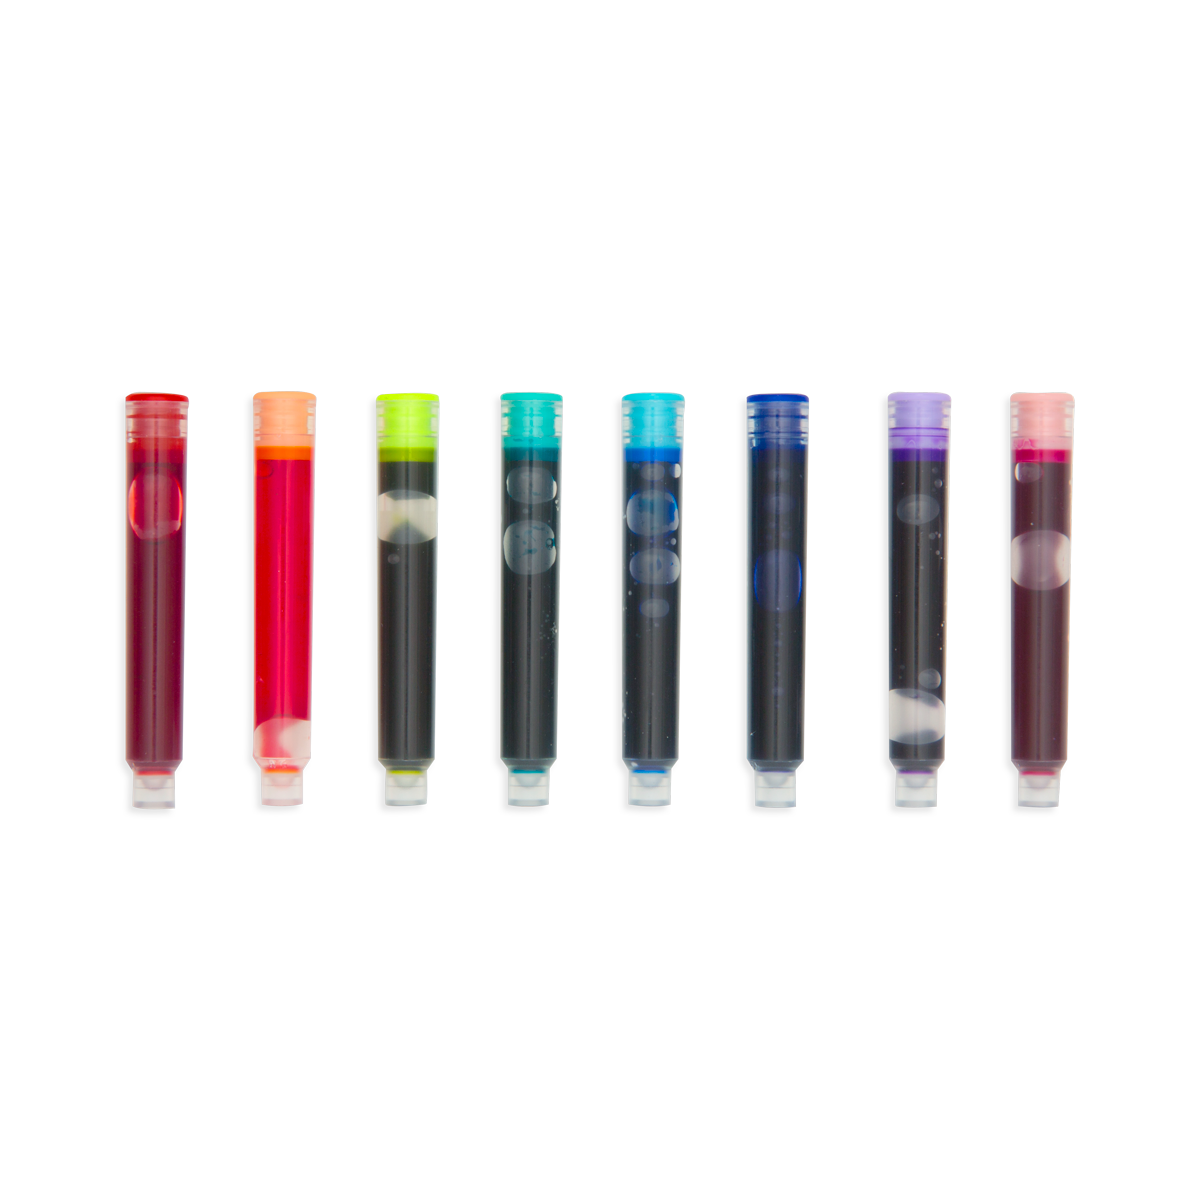 Color Write Set of 8 multi-color fountain pen ink cartridges fit all OOLY fountain pens out of package in a row